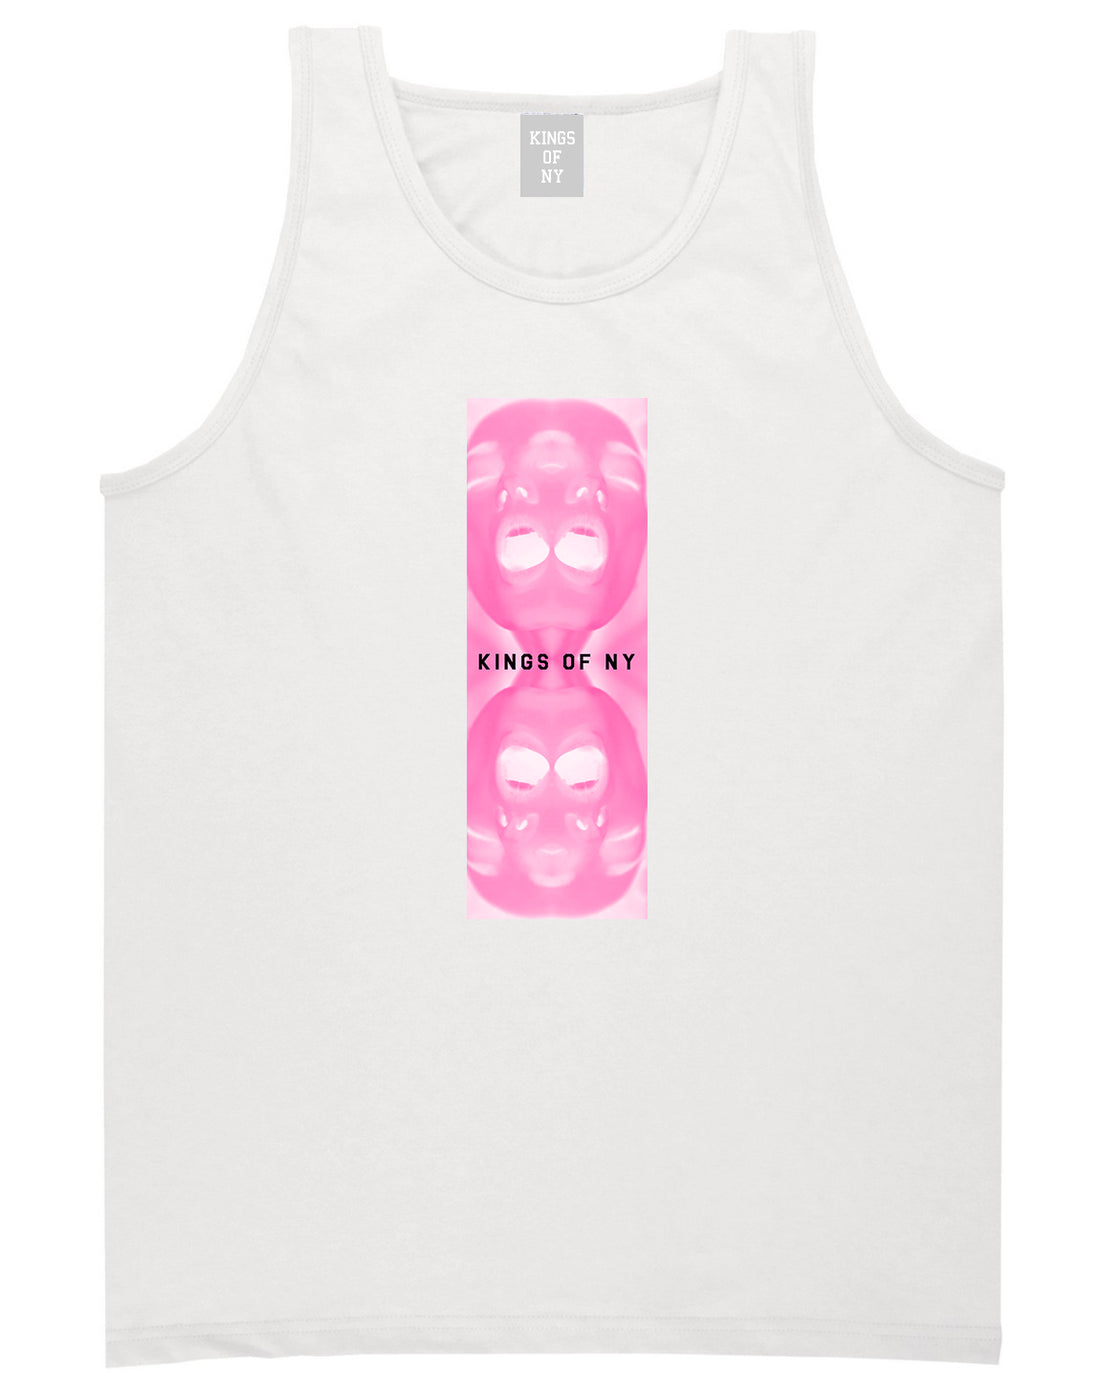 After Dark Mens Tank Top Shirt White by Kings Of NY